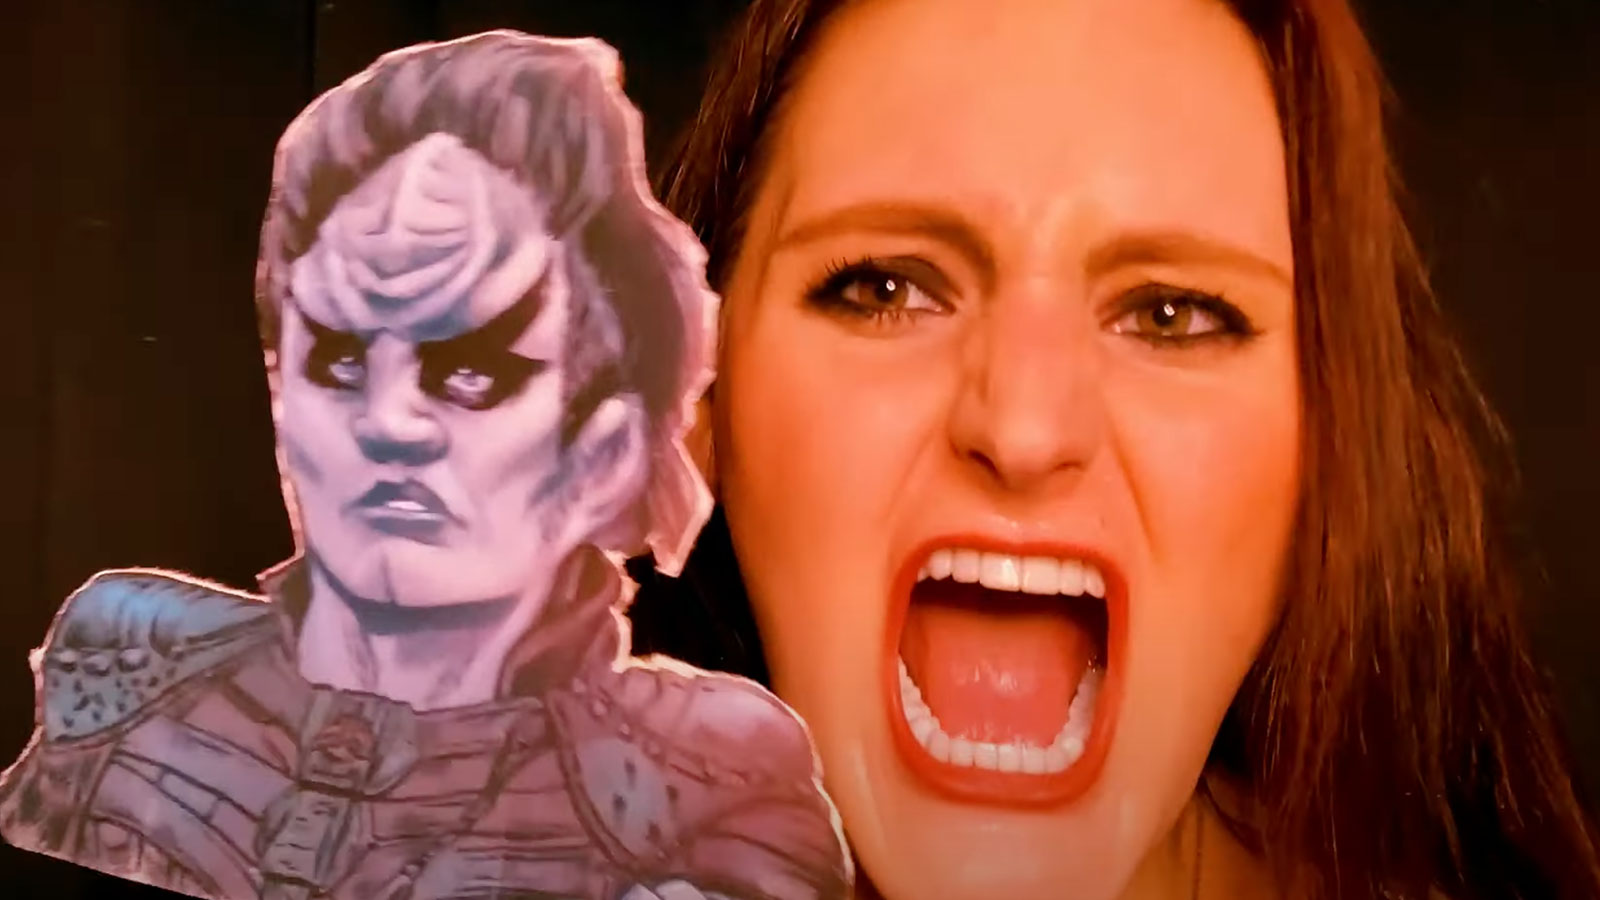 STAR TREK ONLINE releases “House United” for Playstation And Xbox + Mary Chieffo’s music video for her new Klingon song “Steel & Flame”